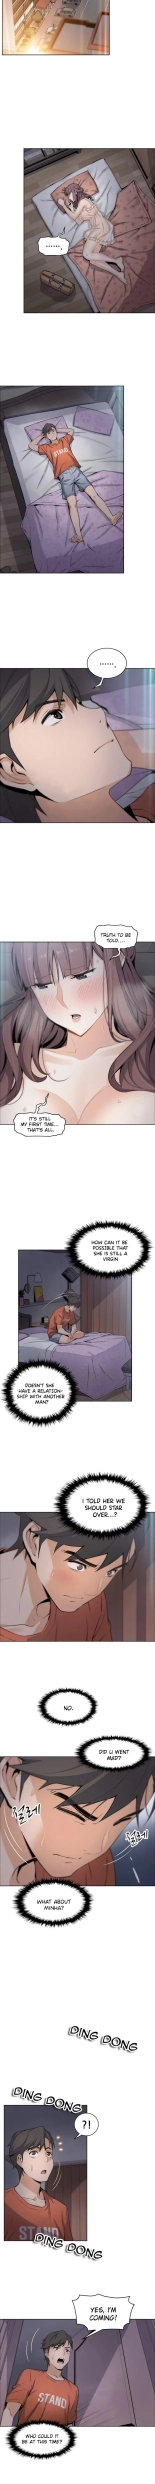 Housekeeper  Ch.4949   Completed : page 130